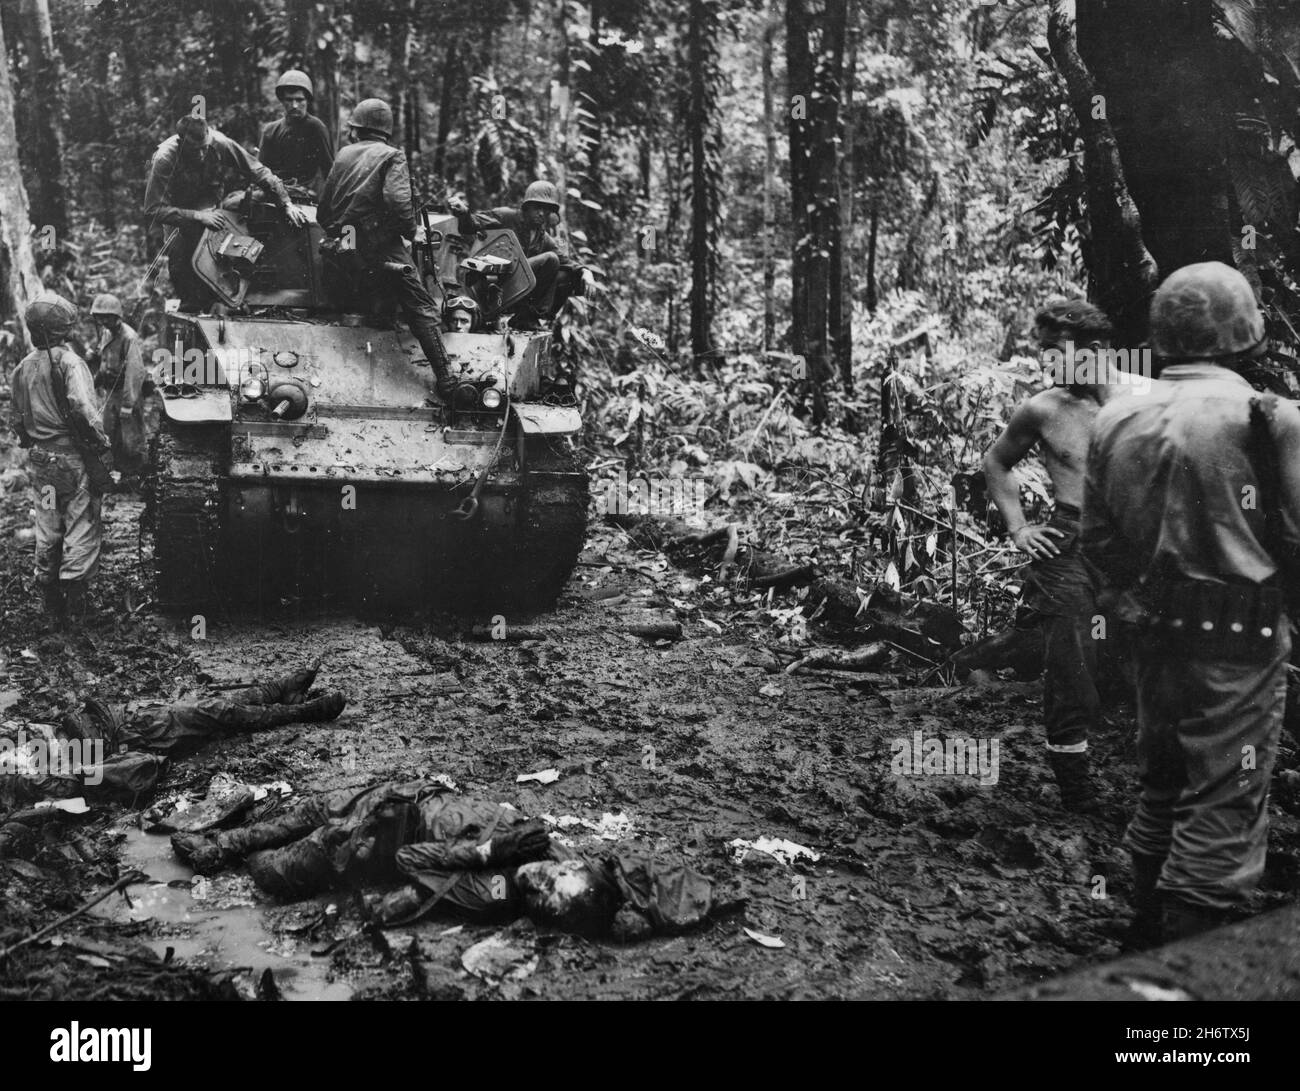 BOUGAINVILLE, PACIFIC OCEAN - circa November 1943 - US Marines on foot and in an armoured personnel carrier after an engagement with Japanese soldiers Stock Photo